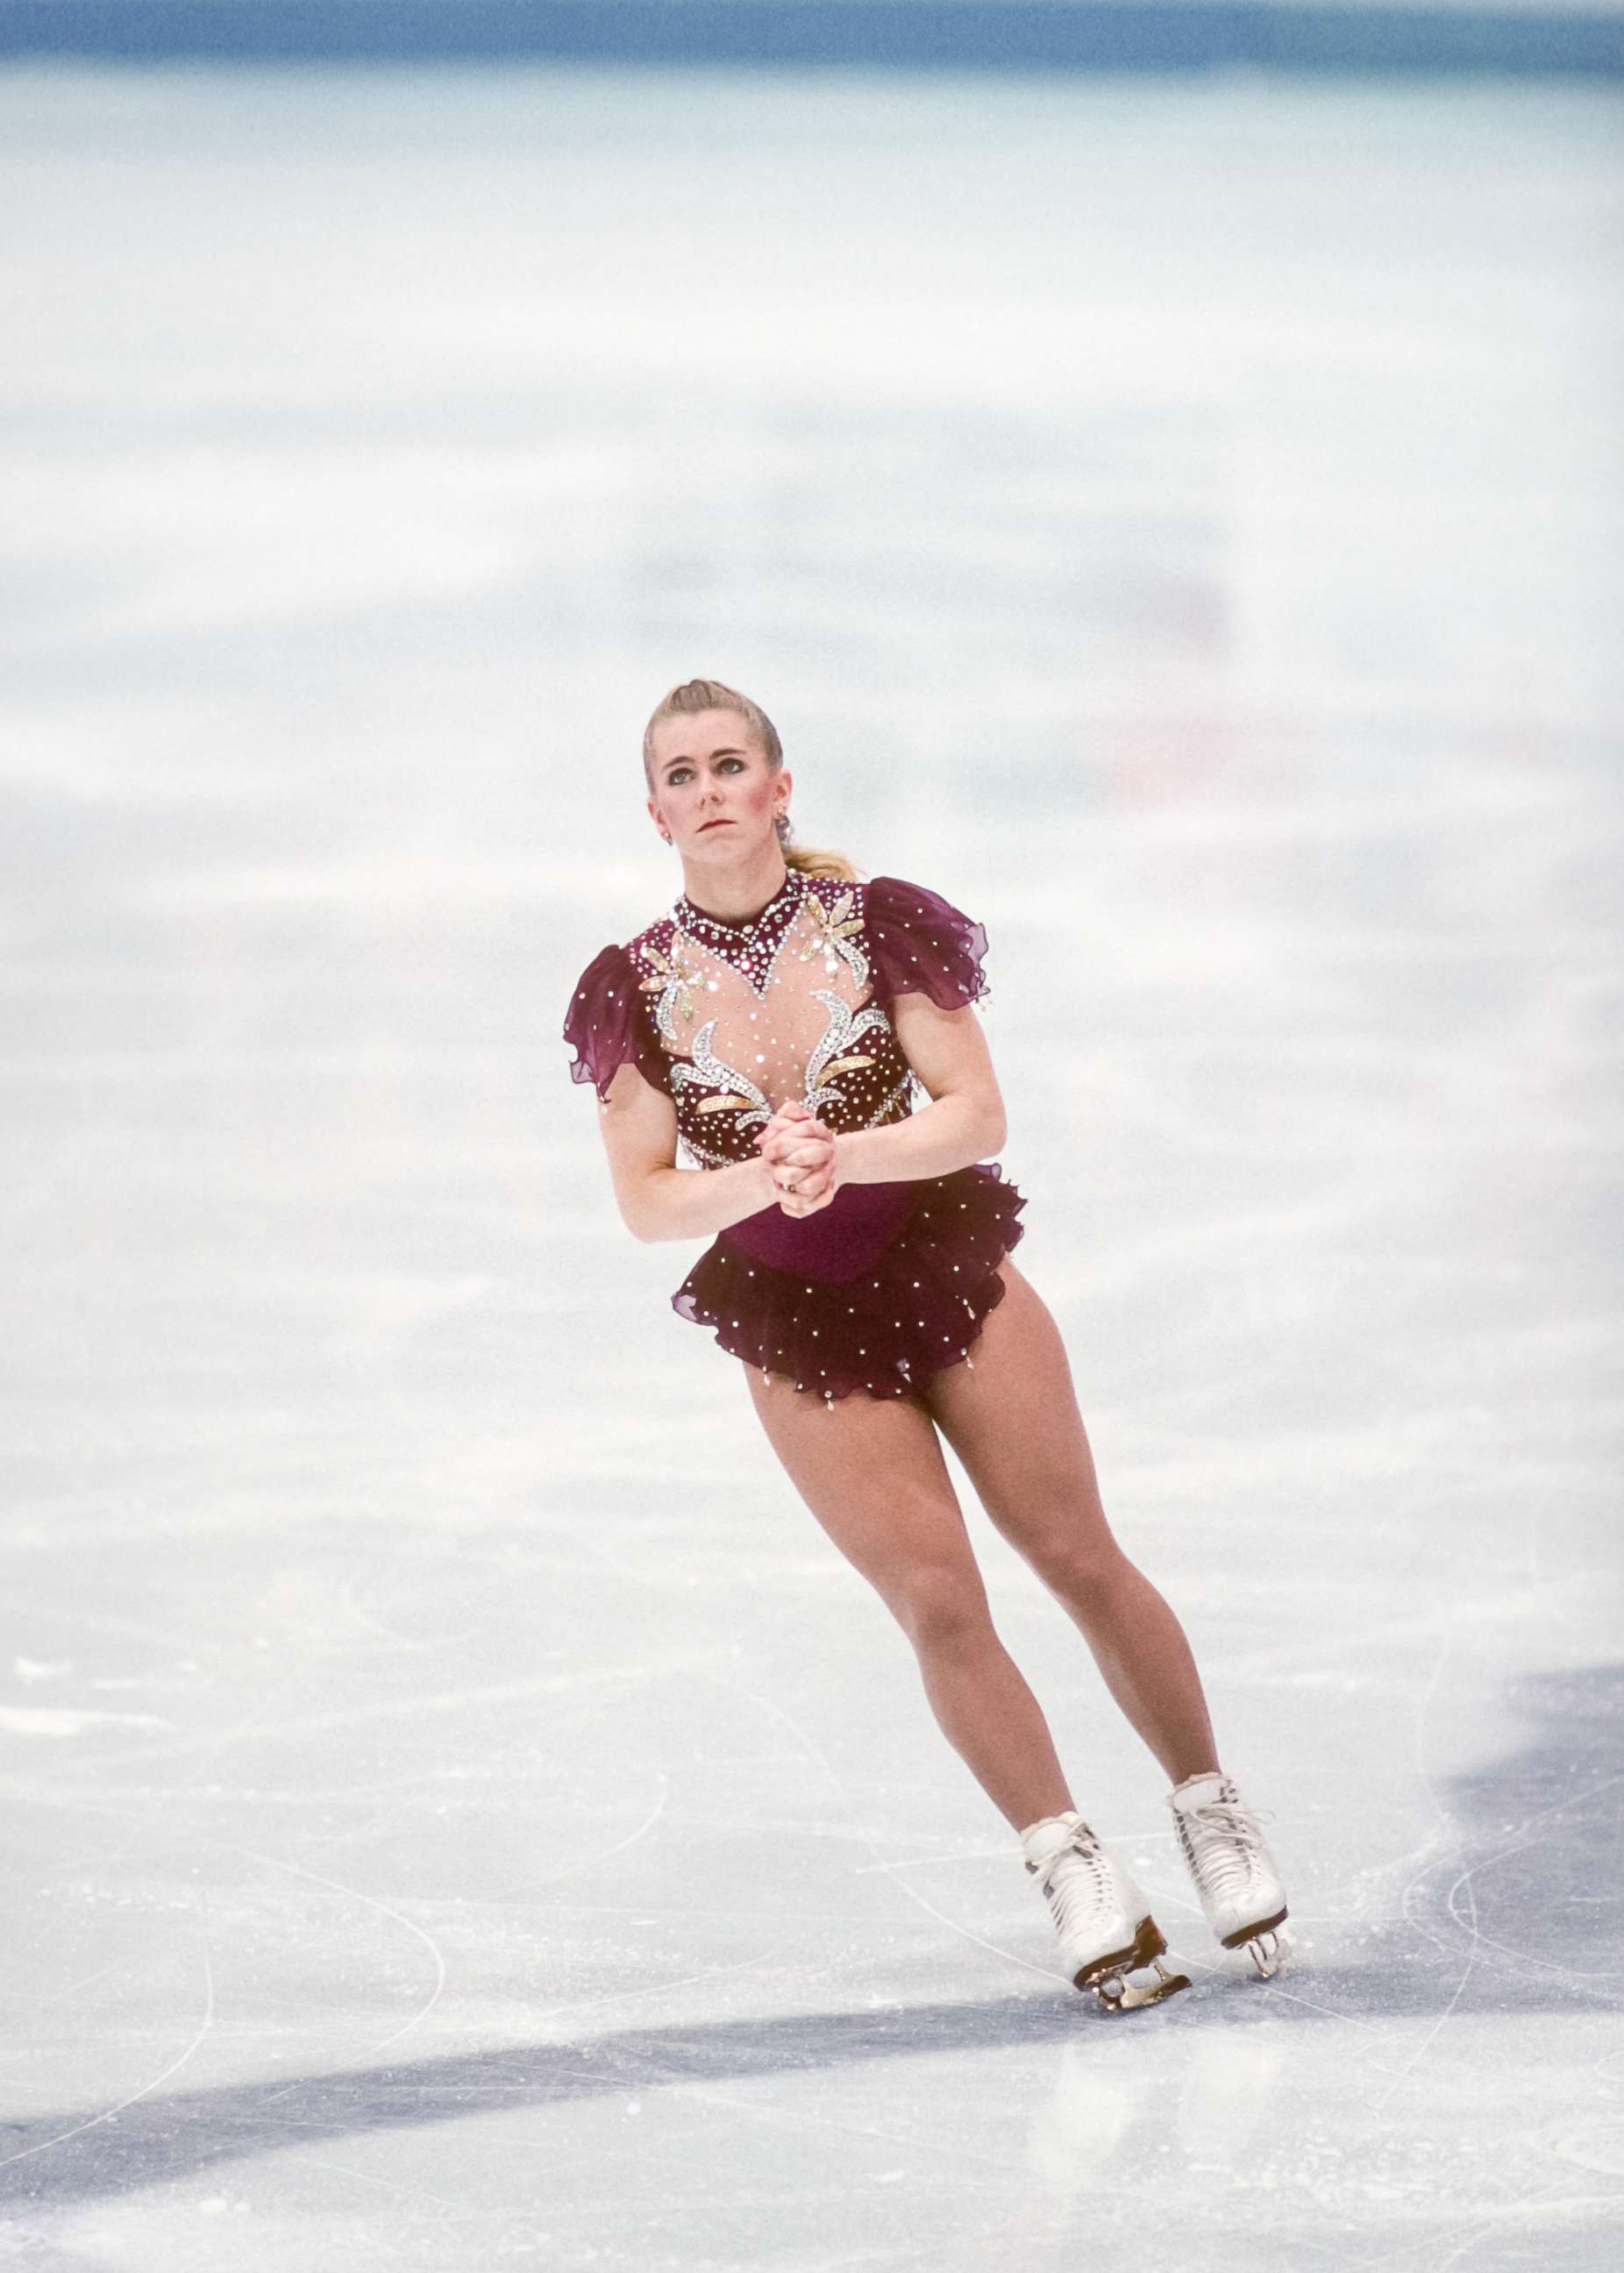 PHOTO: Tonya Harding of the USA competes in the Free Skate portion of the Women's Figure Skating competition of the 1994 Winter Olympics, Feb. 25, 1994, at the Hamar Olympic Hall in Lillehammer, Norway.